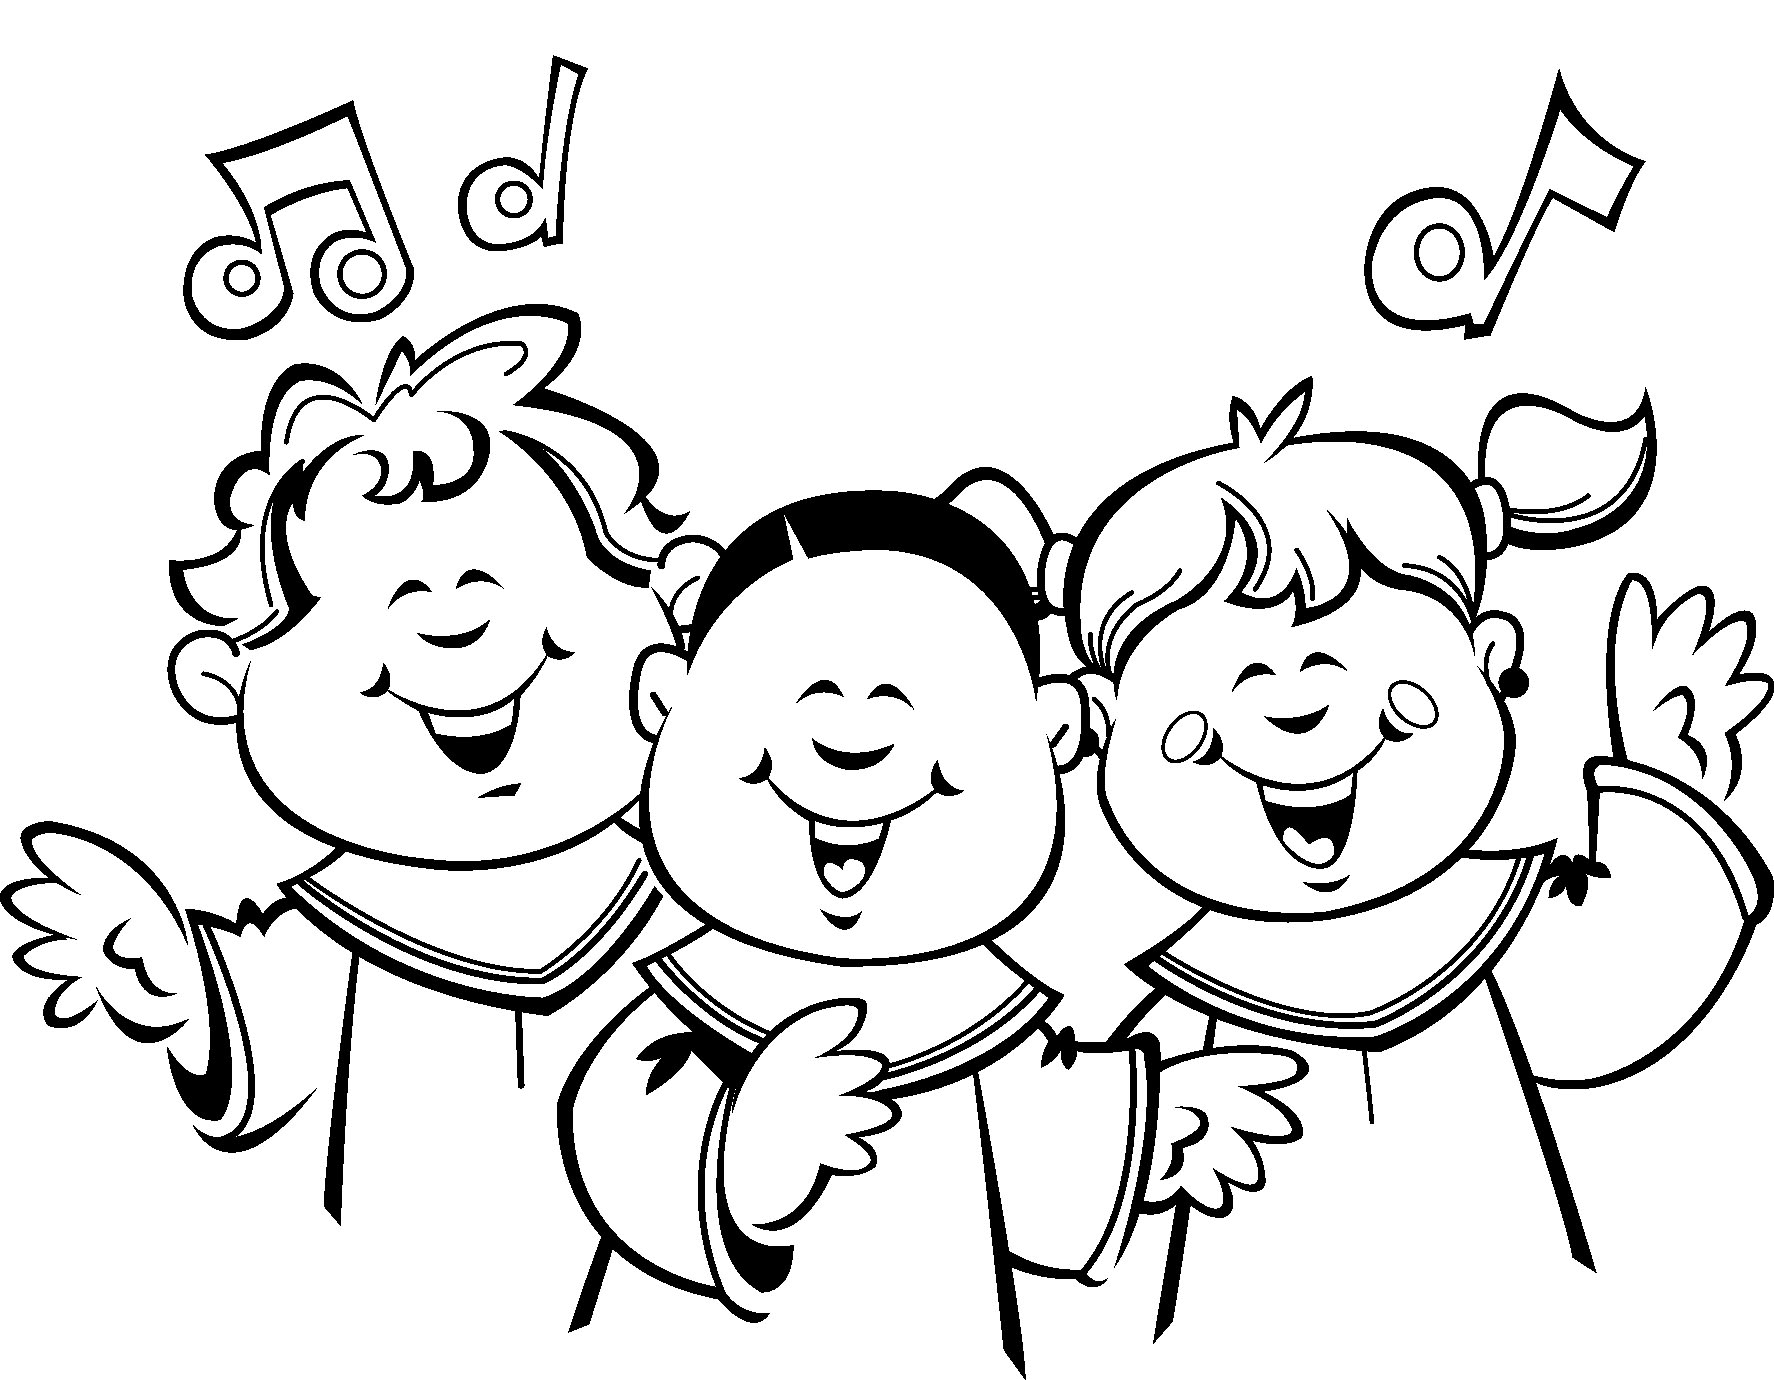 Children Choir Sketch Coloring Page Download Png Clipart